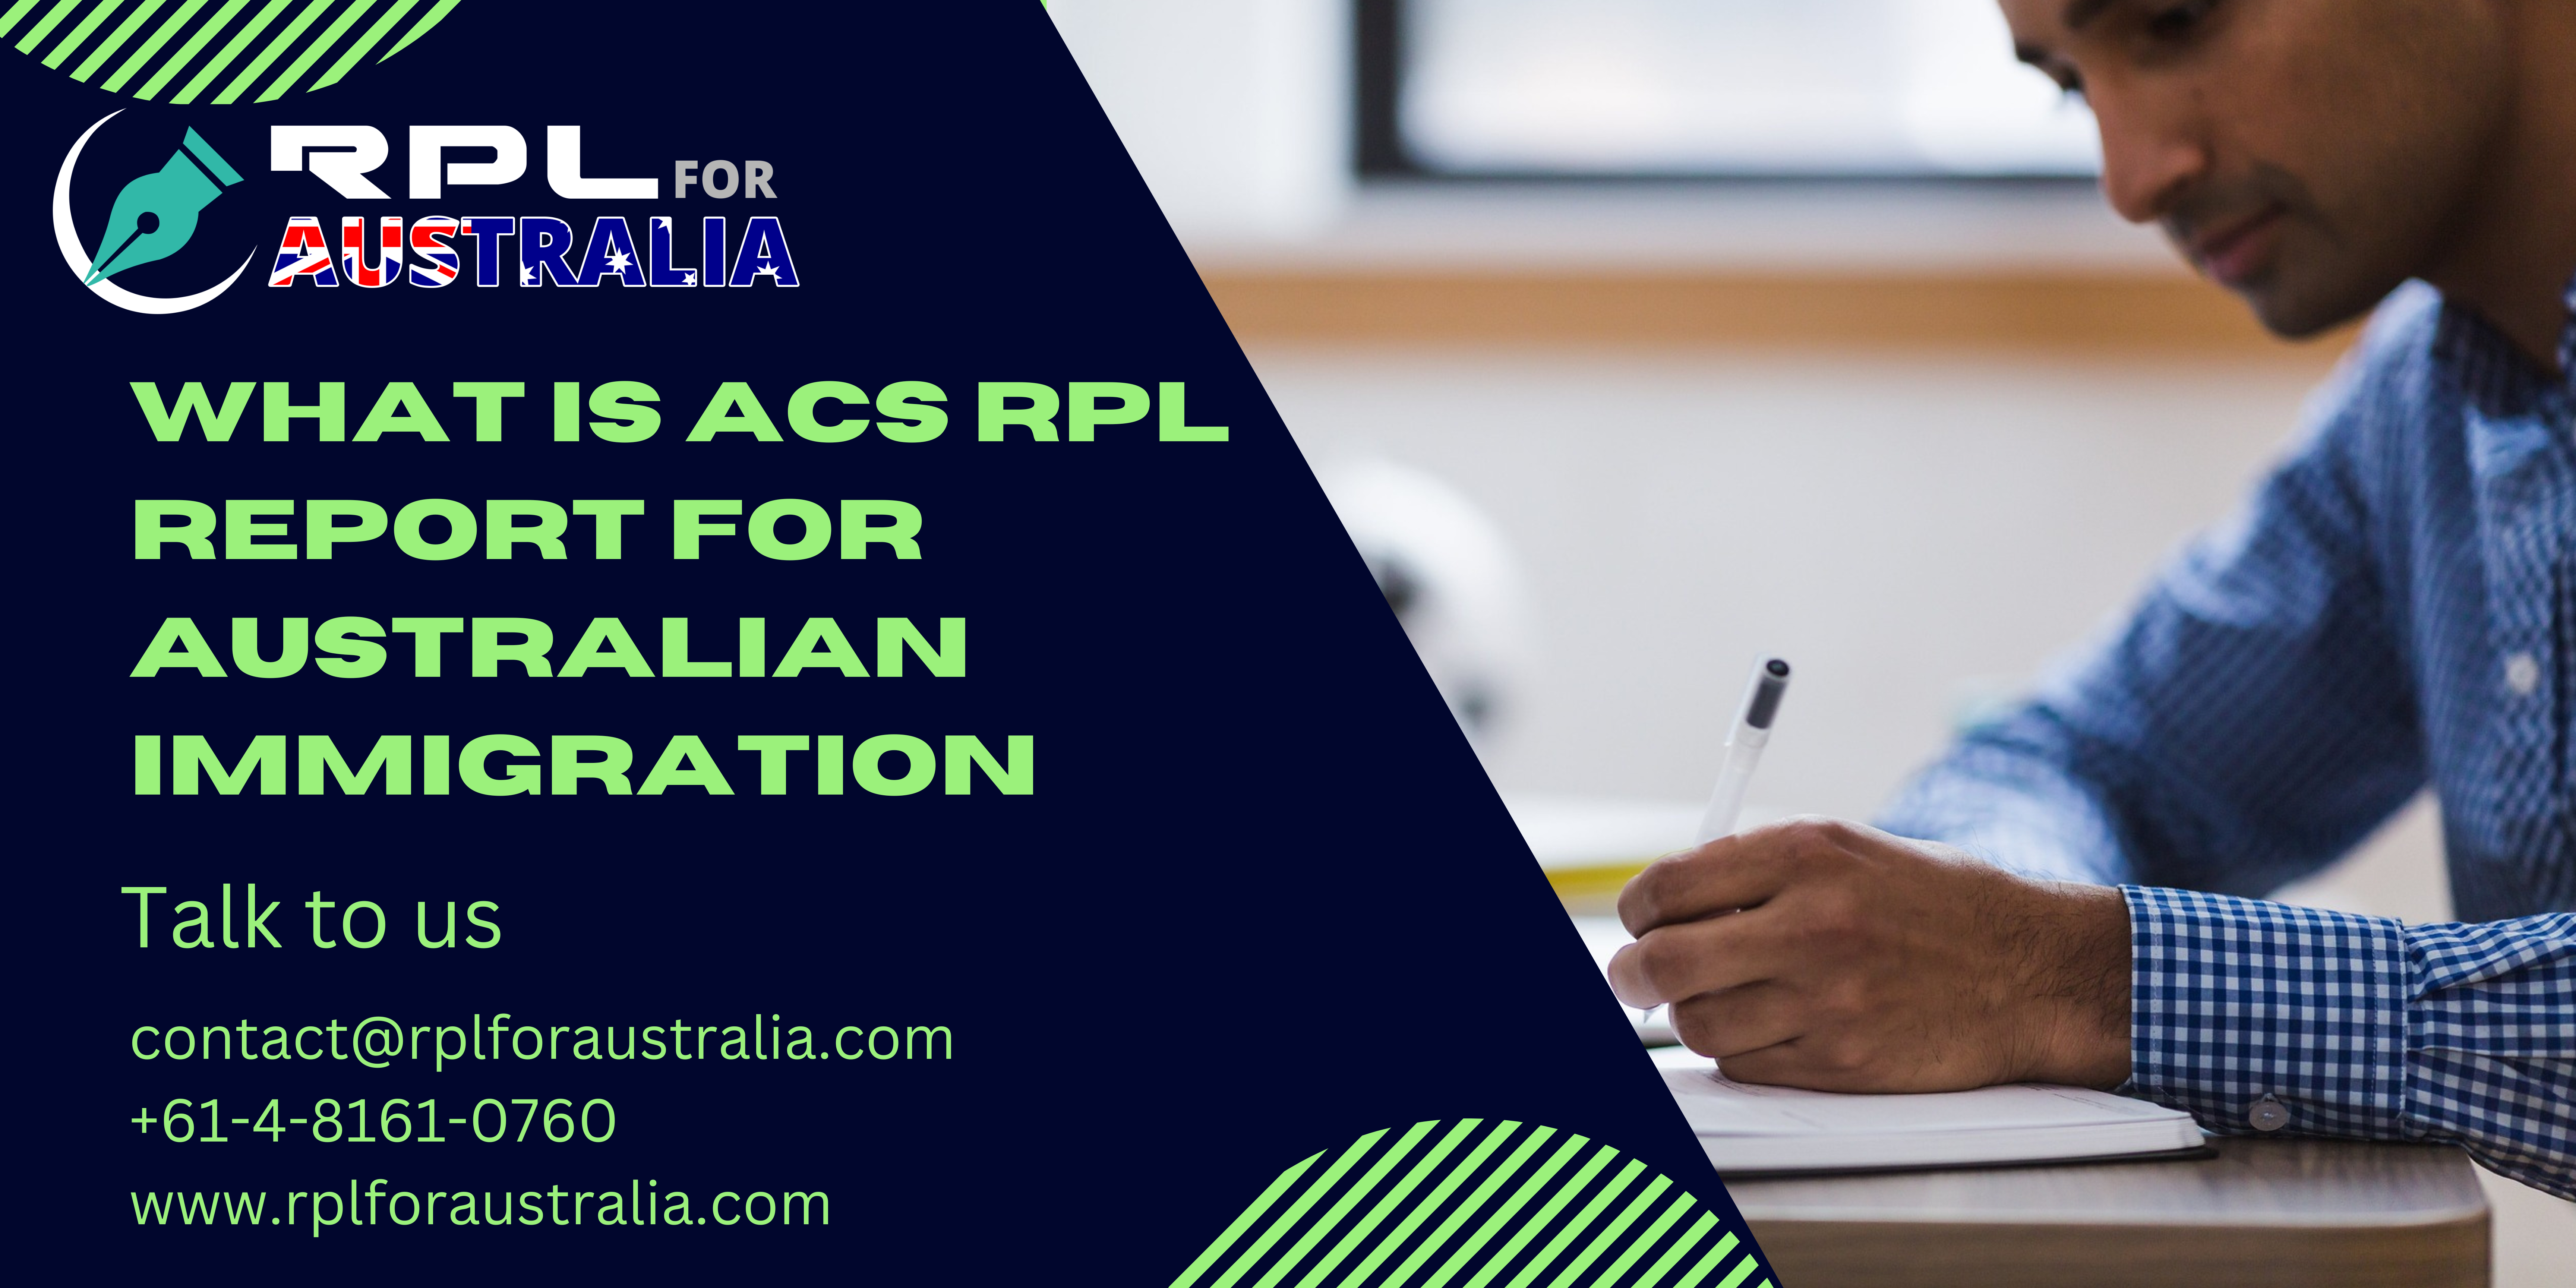 What Is ACS RPL Report For Australian Immigration